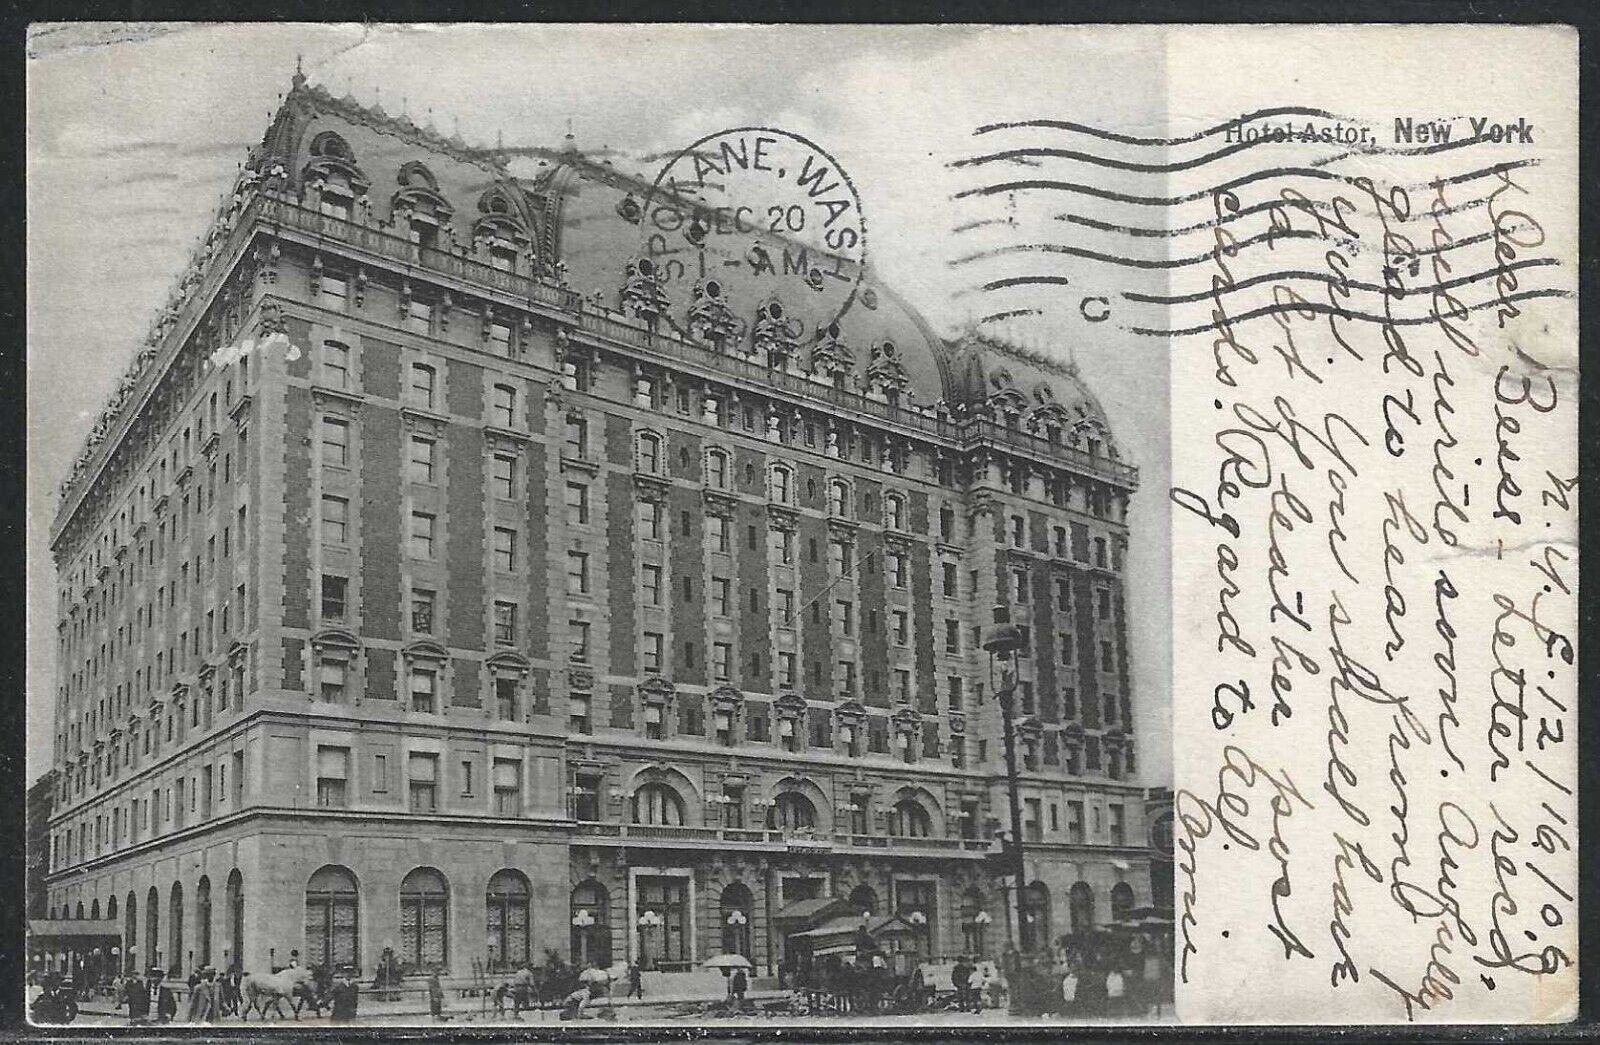 Hotel Astor, Manhattan, New York City, Very Early Postcard, Used in 1906